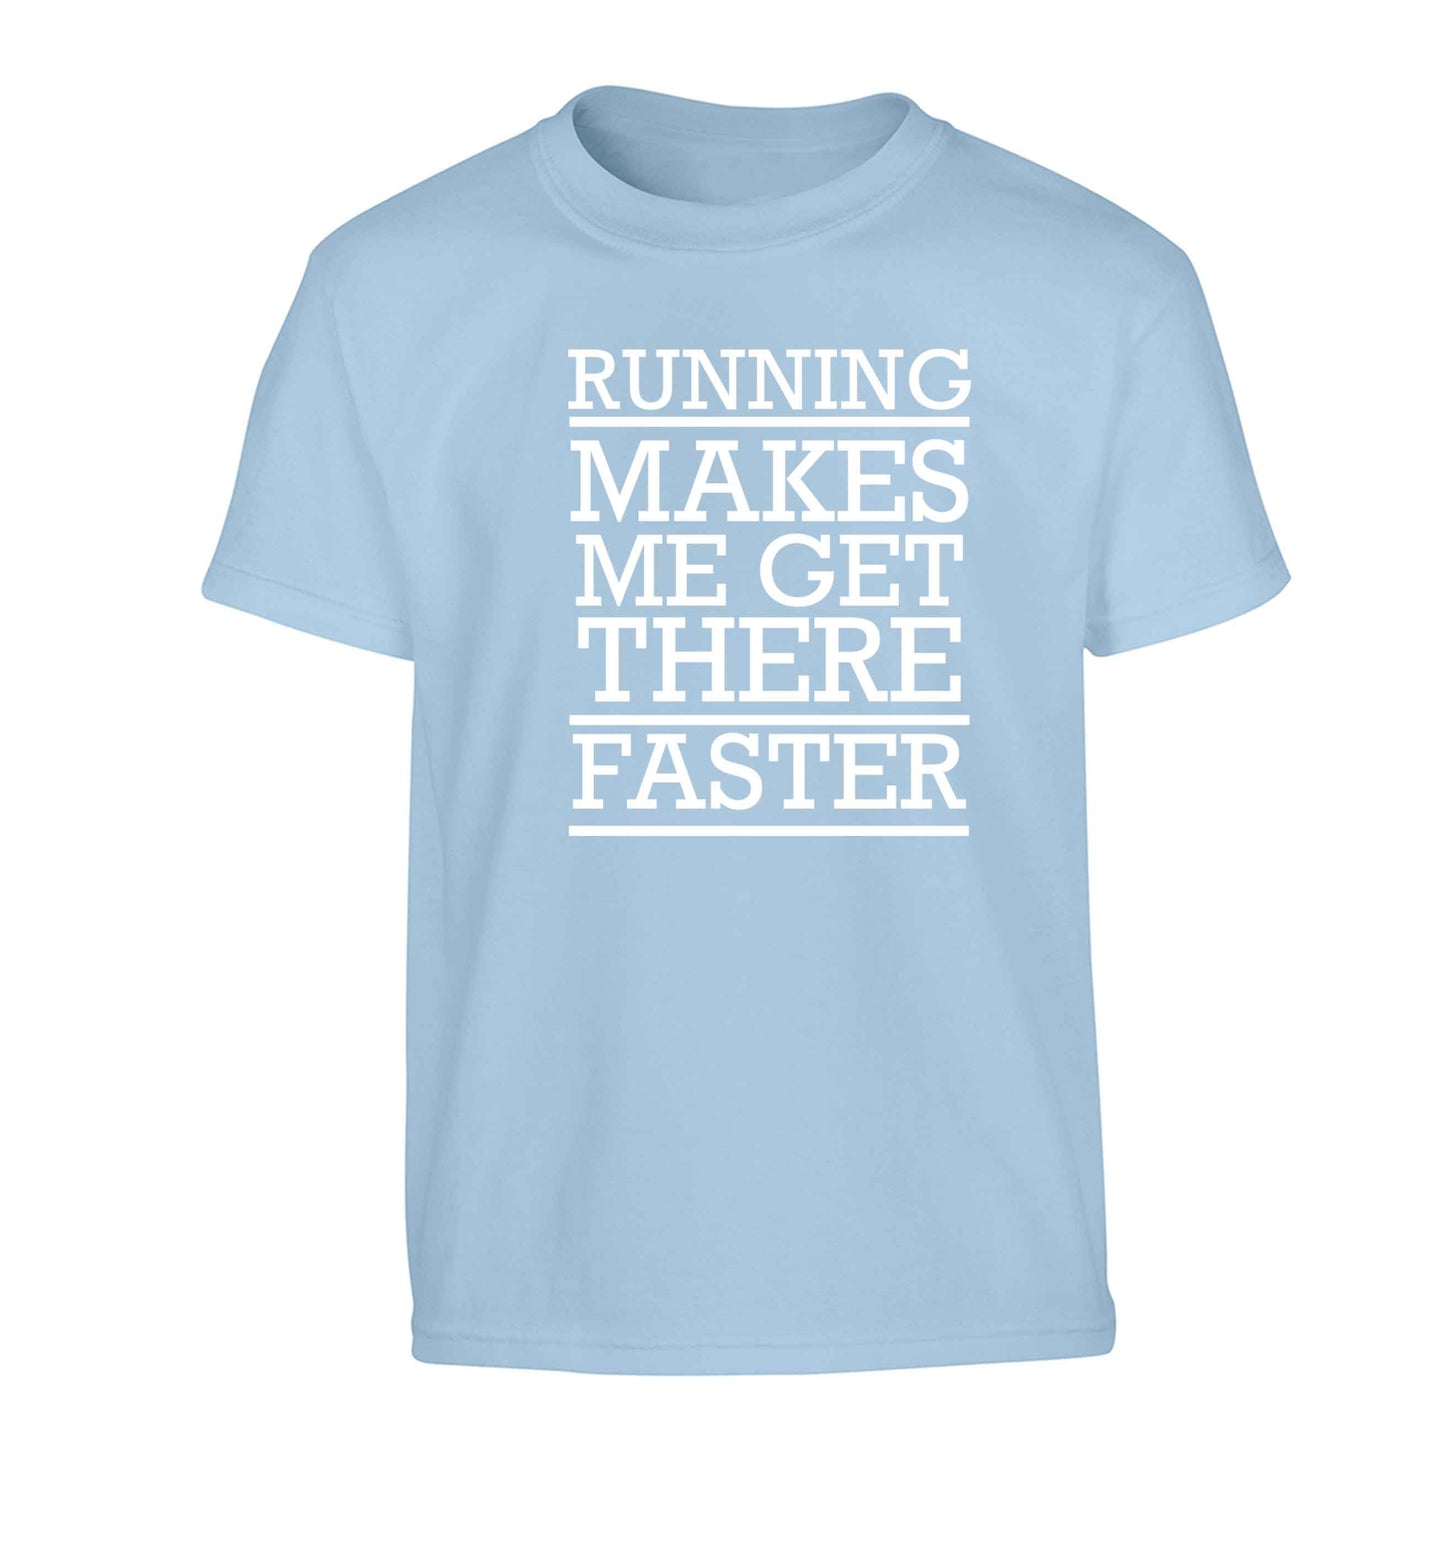 Running makes me get there faster Children's light blue Tshirt 12-13 Years